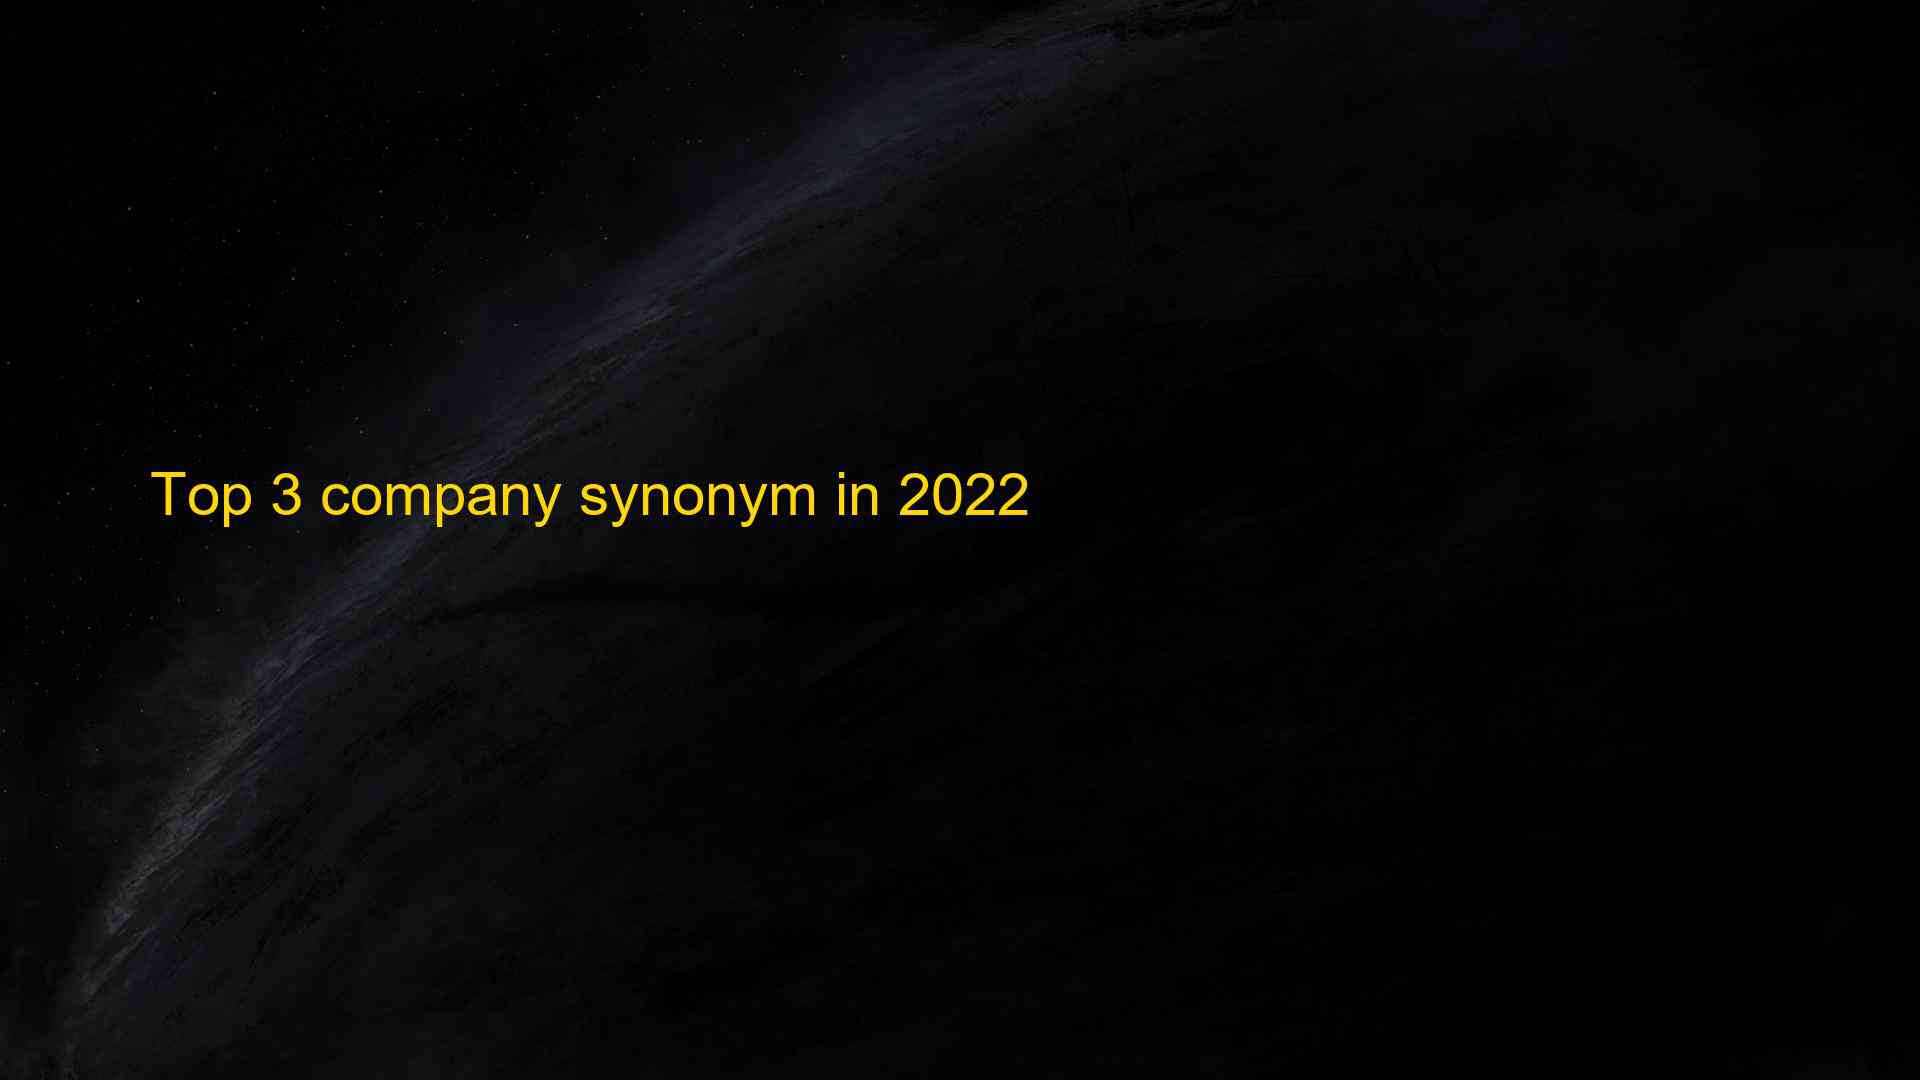 Top 3 company synonym in 2022 1659462957